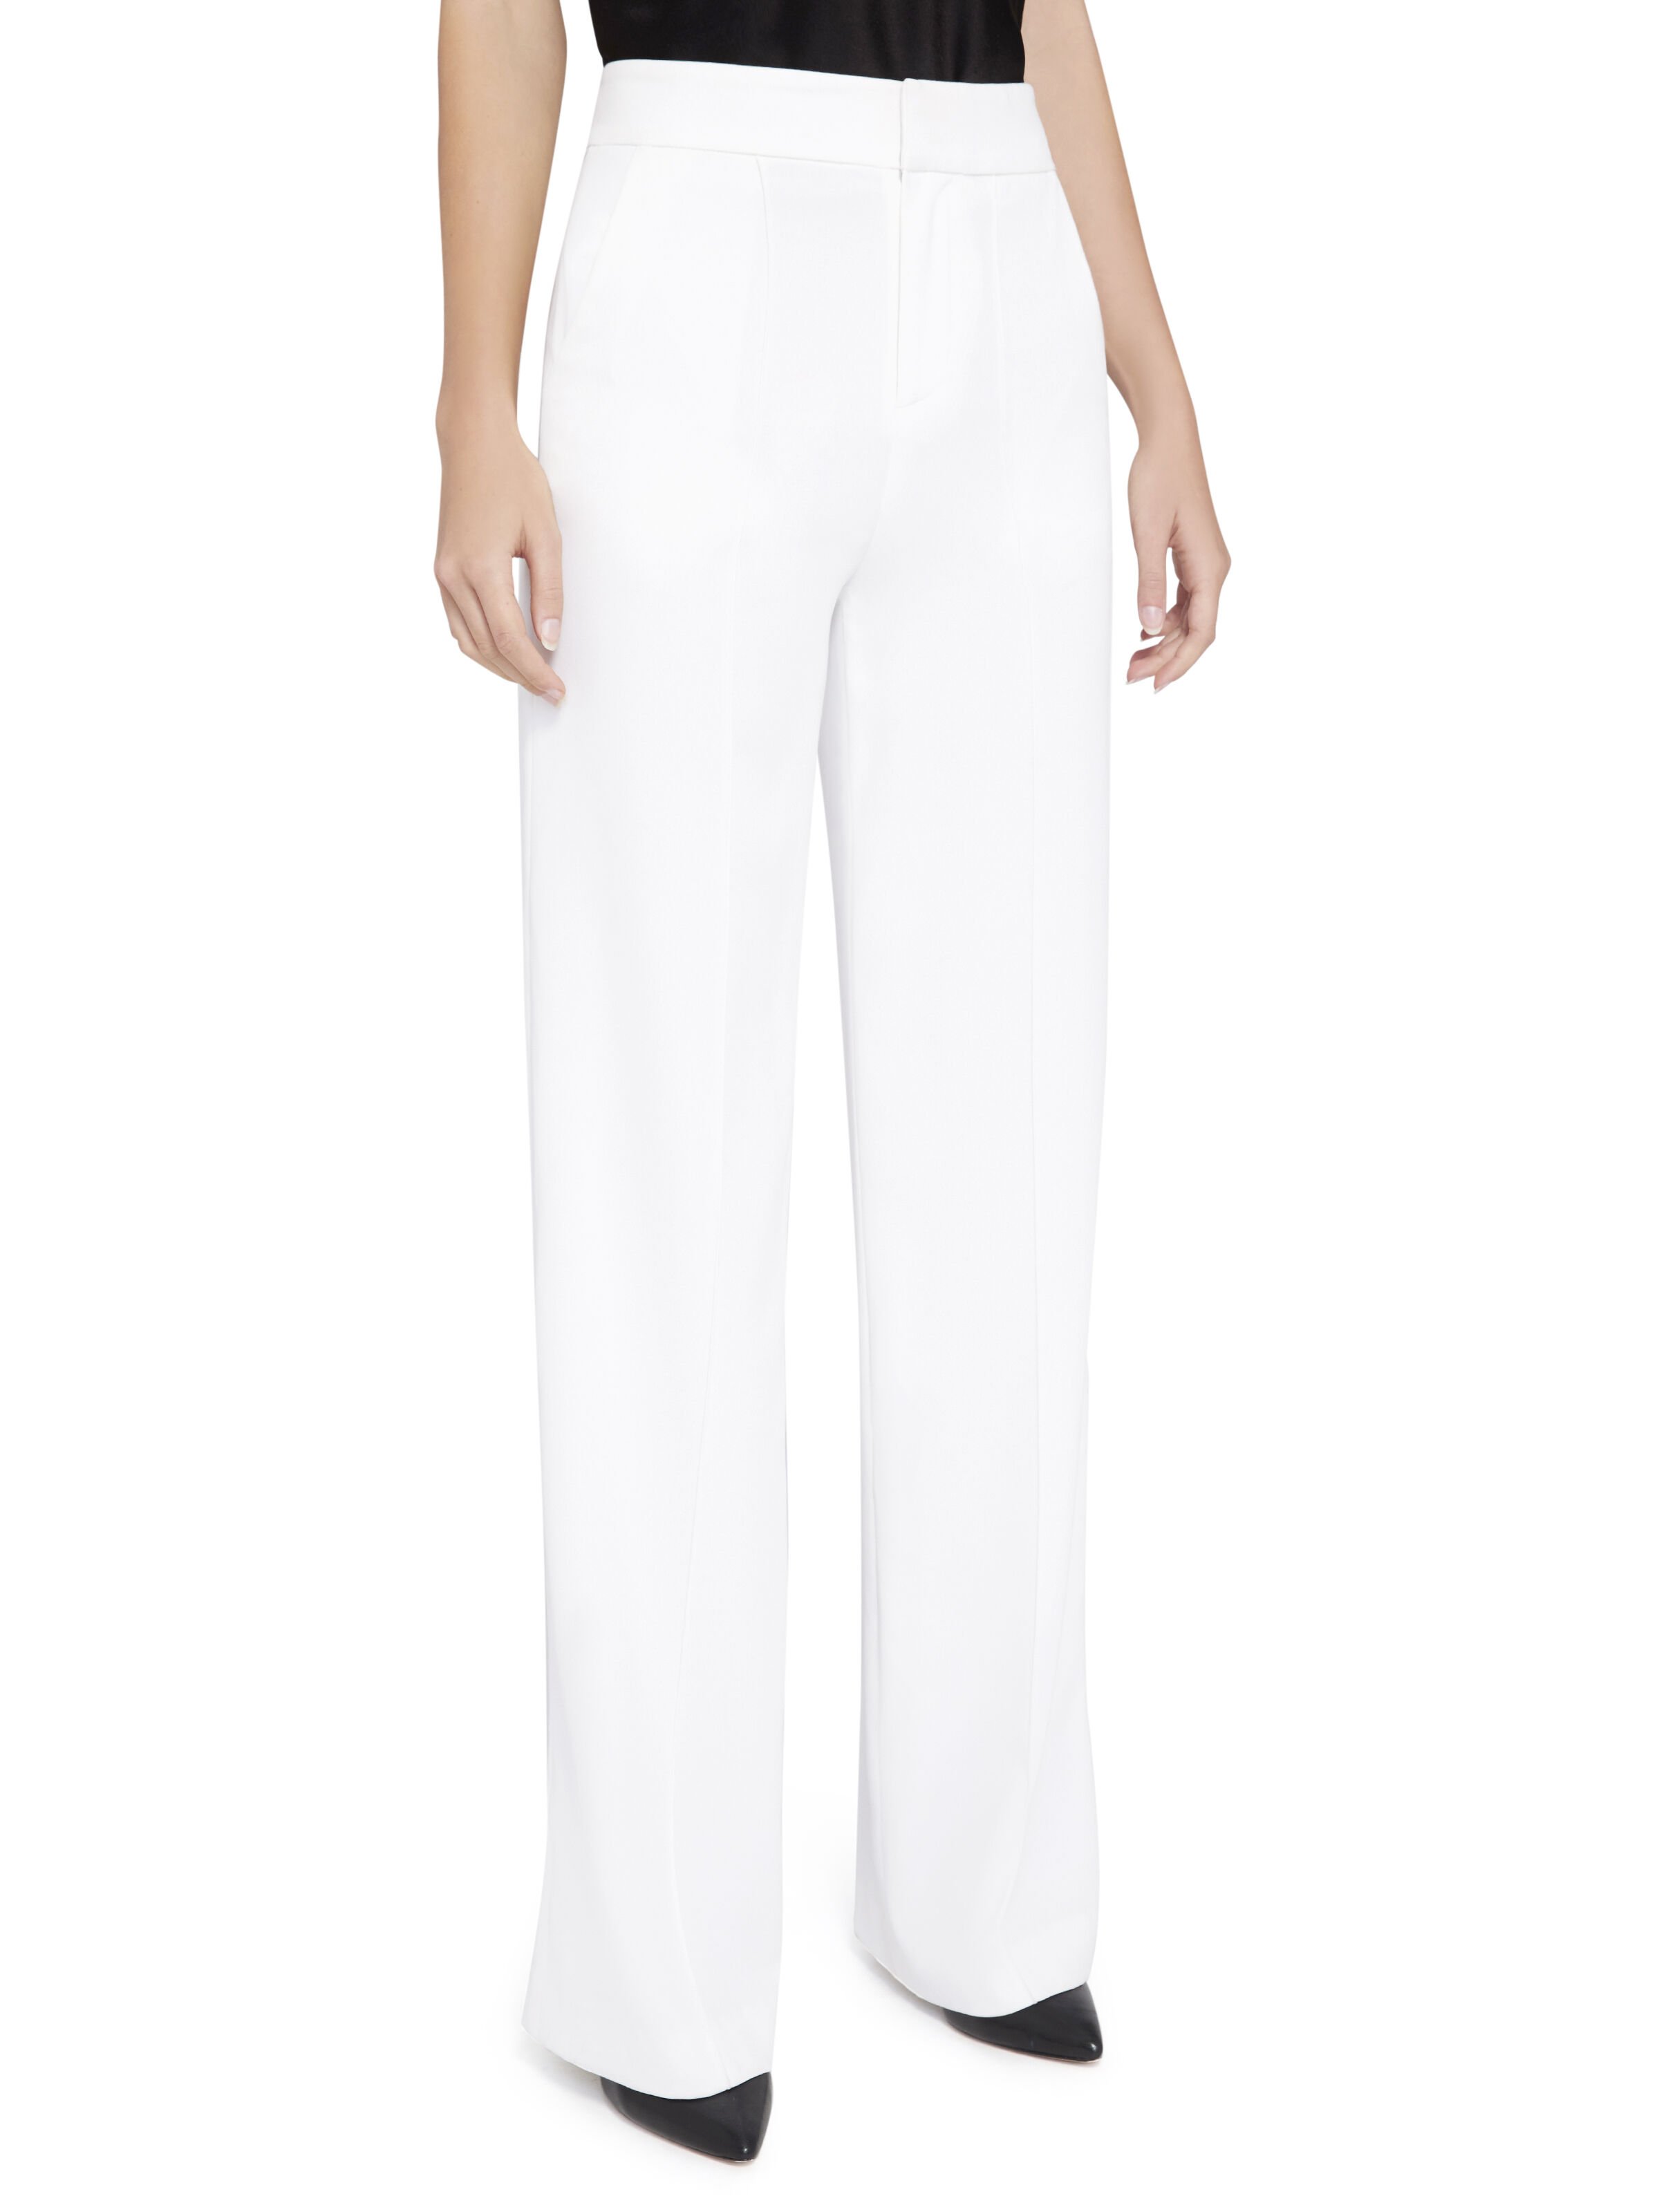 All Pants | Alice And Olivia